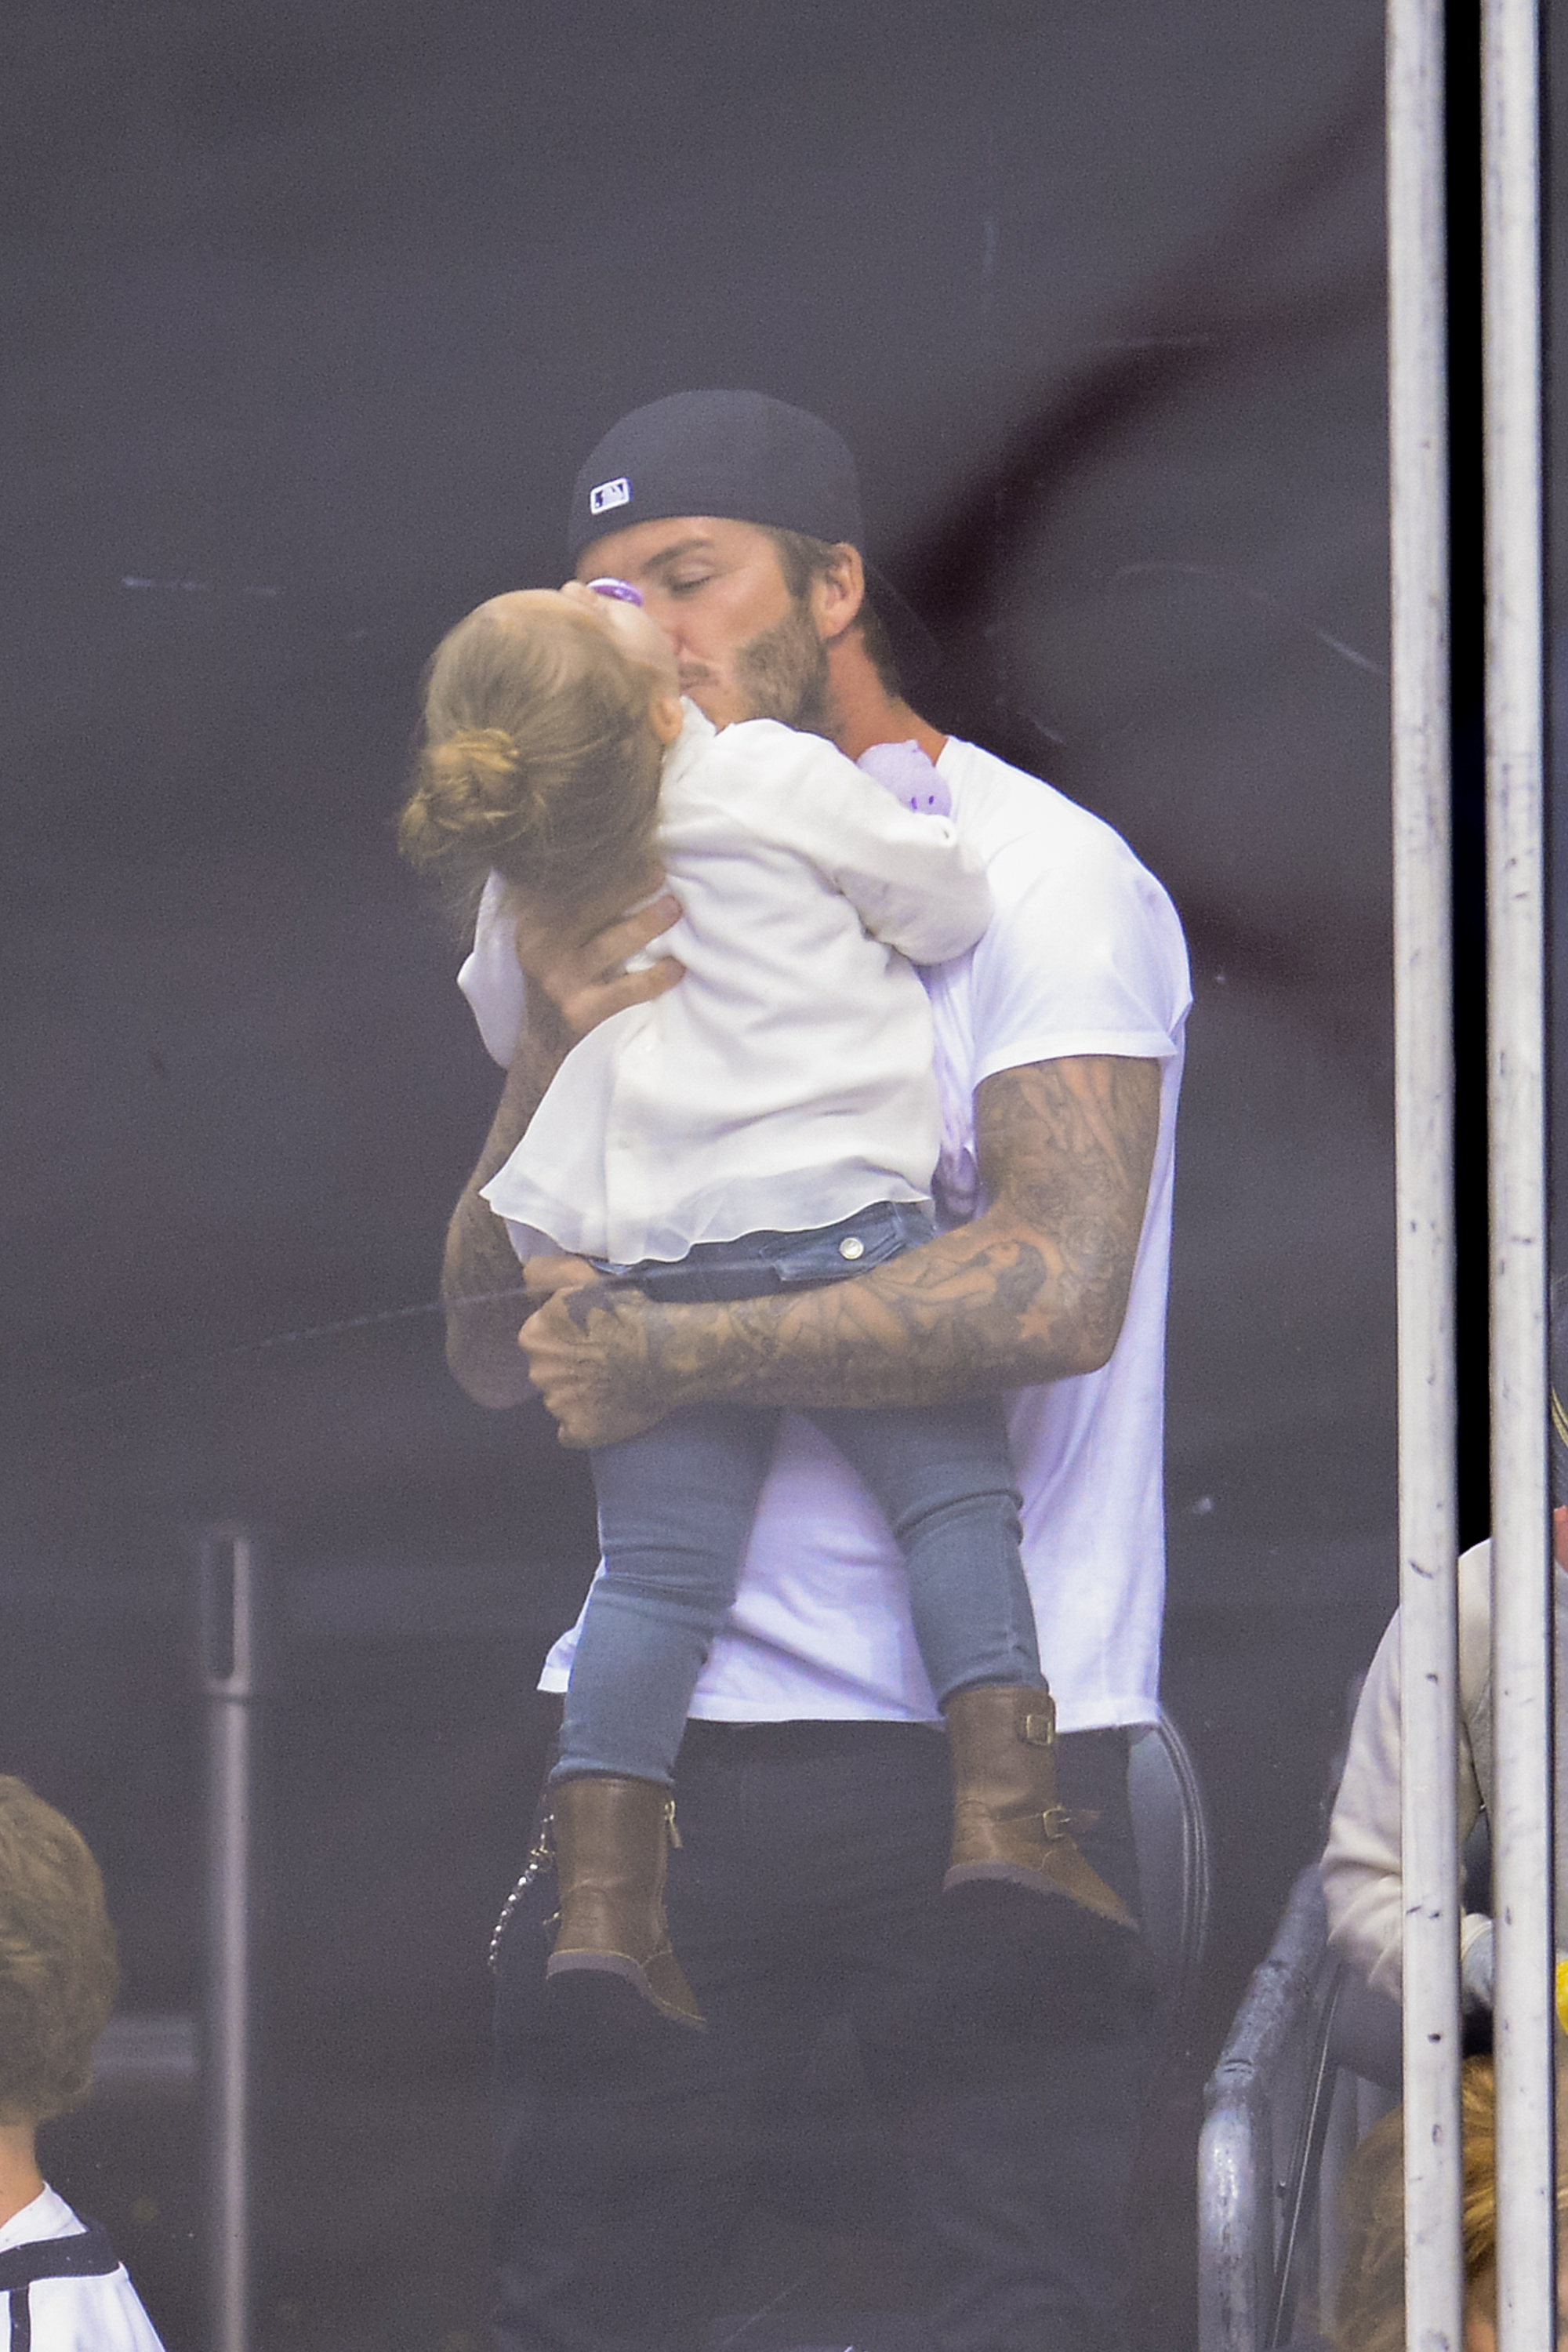 Harper Beckham and David Beckham at a hockey game at Staples Center on April 12, 2014 in Los Angeles, California. | Source: Getty Images